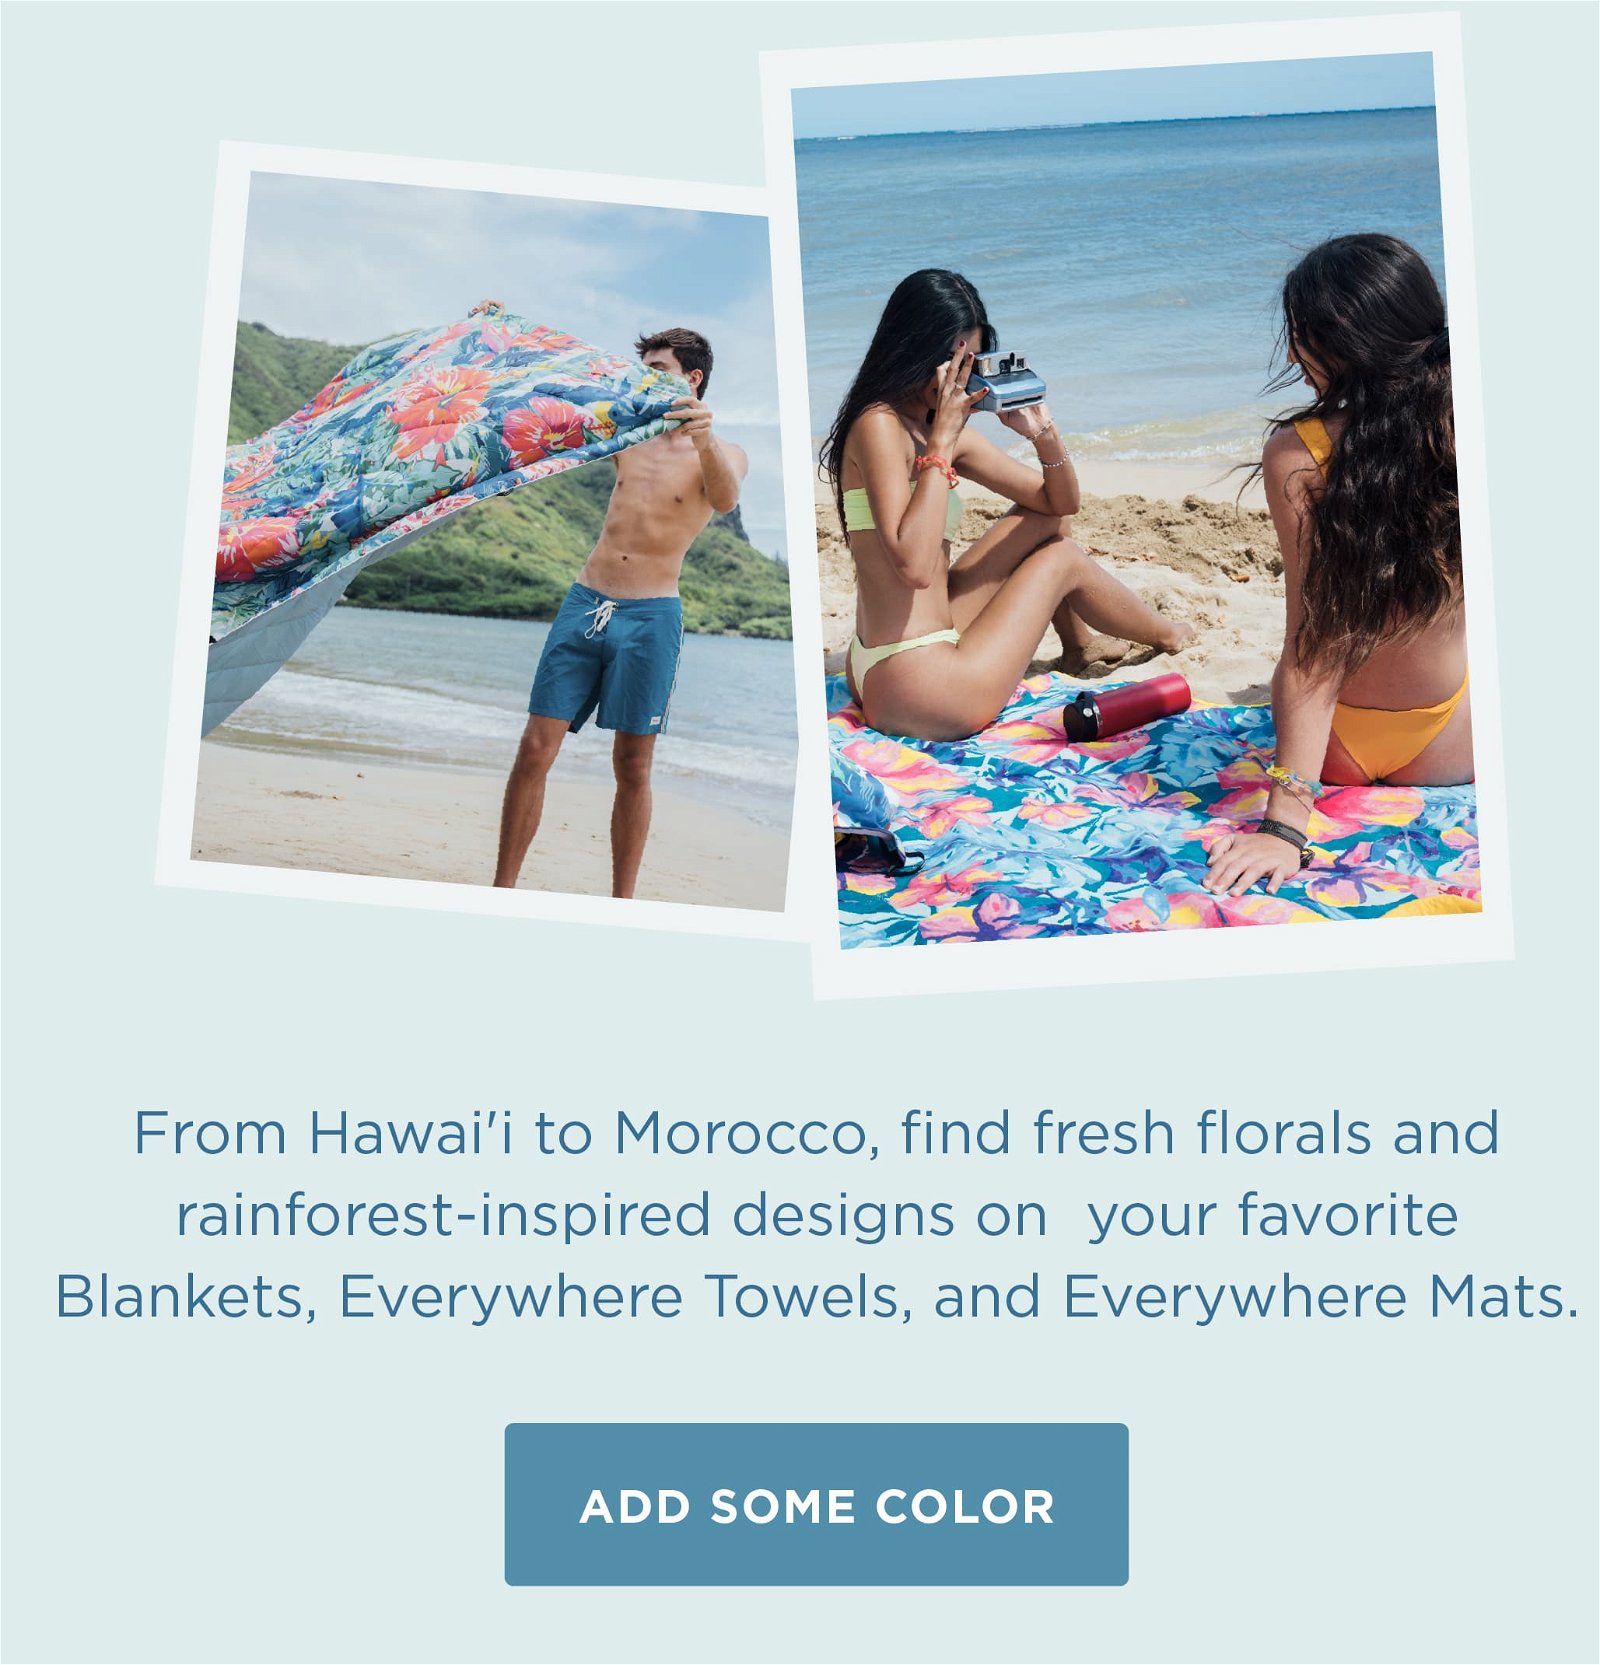 From Hawai'i to Morocco, find fresh florals and rainforst-inspired designs on your favorite Blankets, Everywhere Towels, and Everywhere Mats.